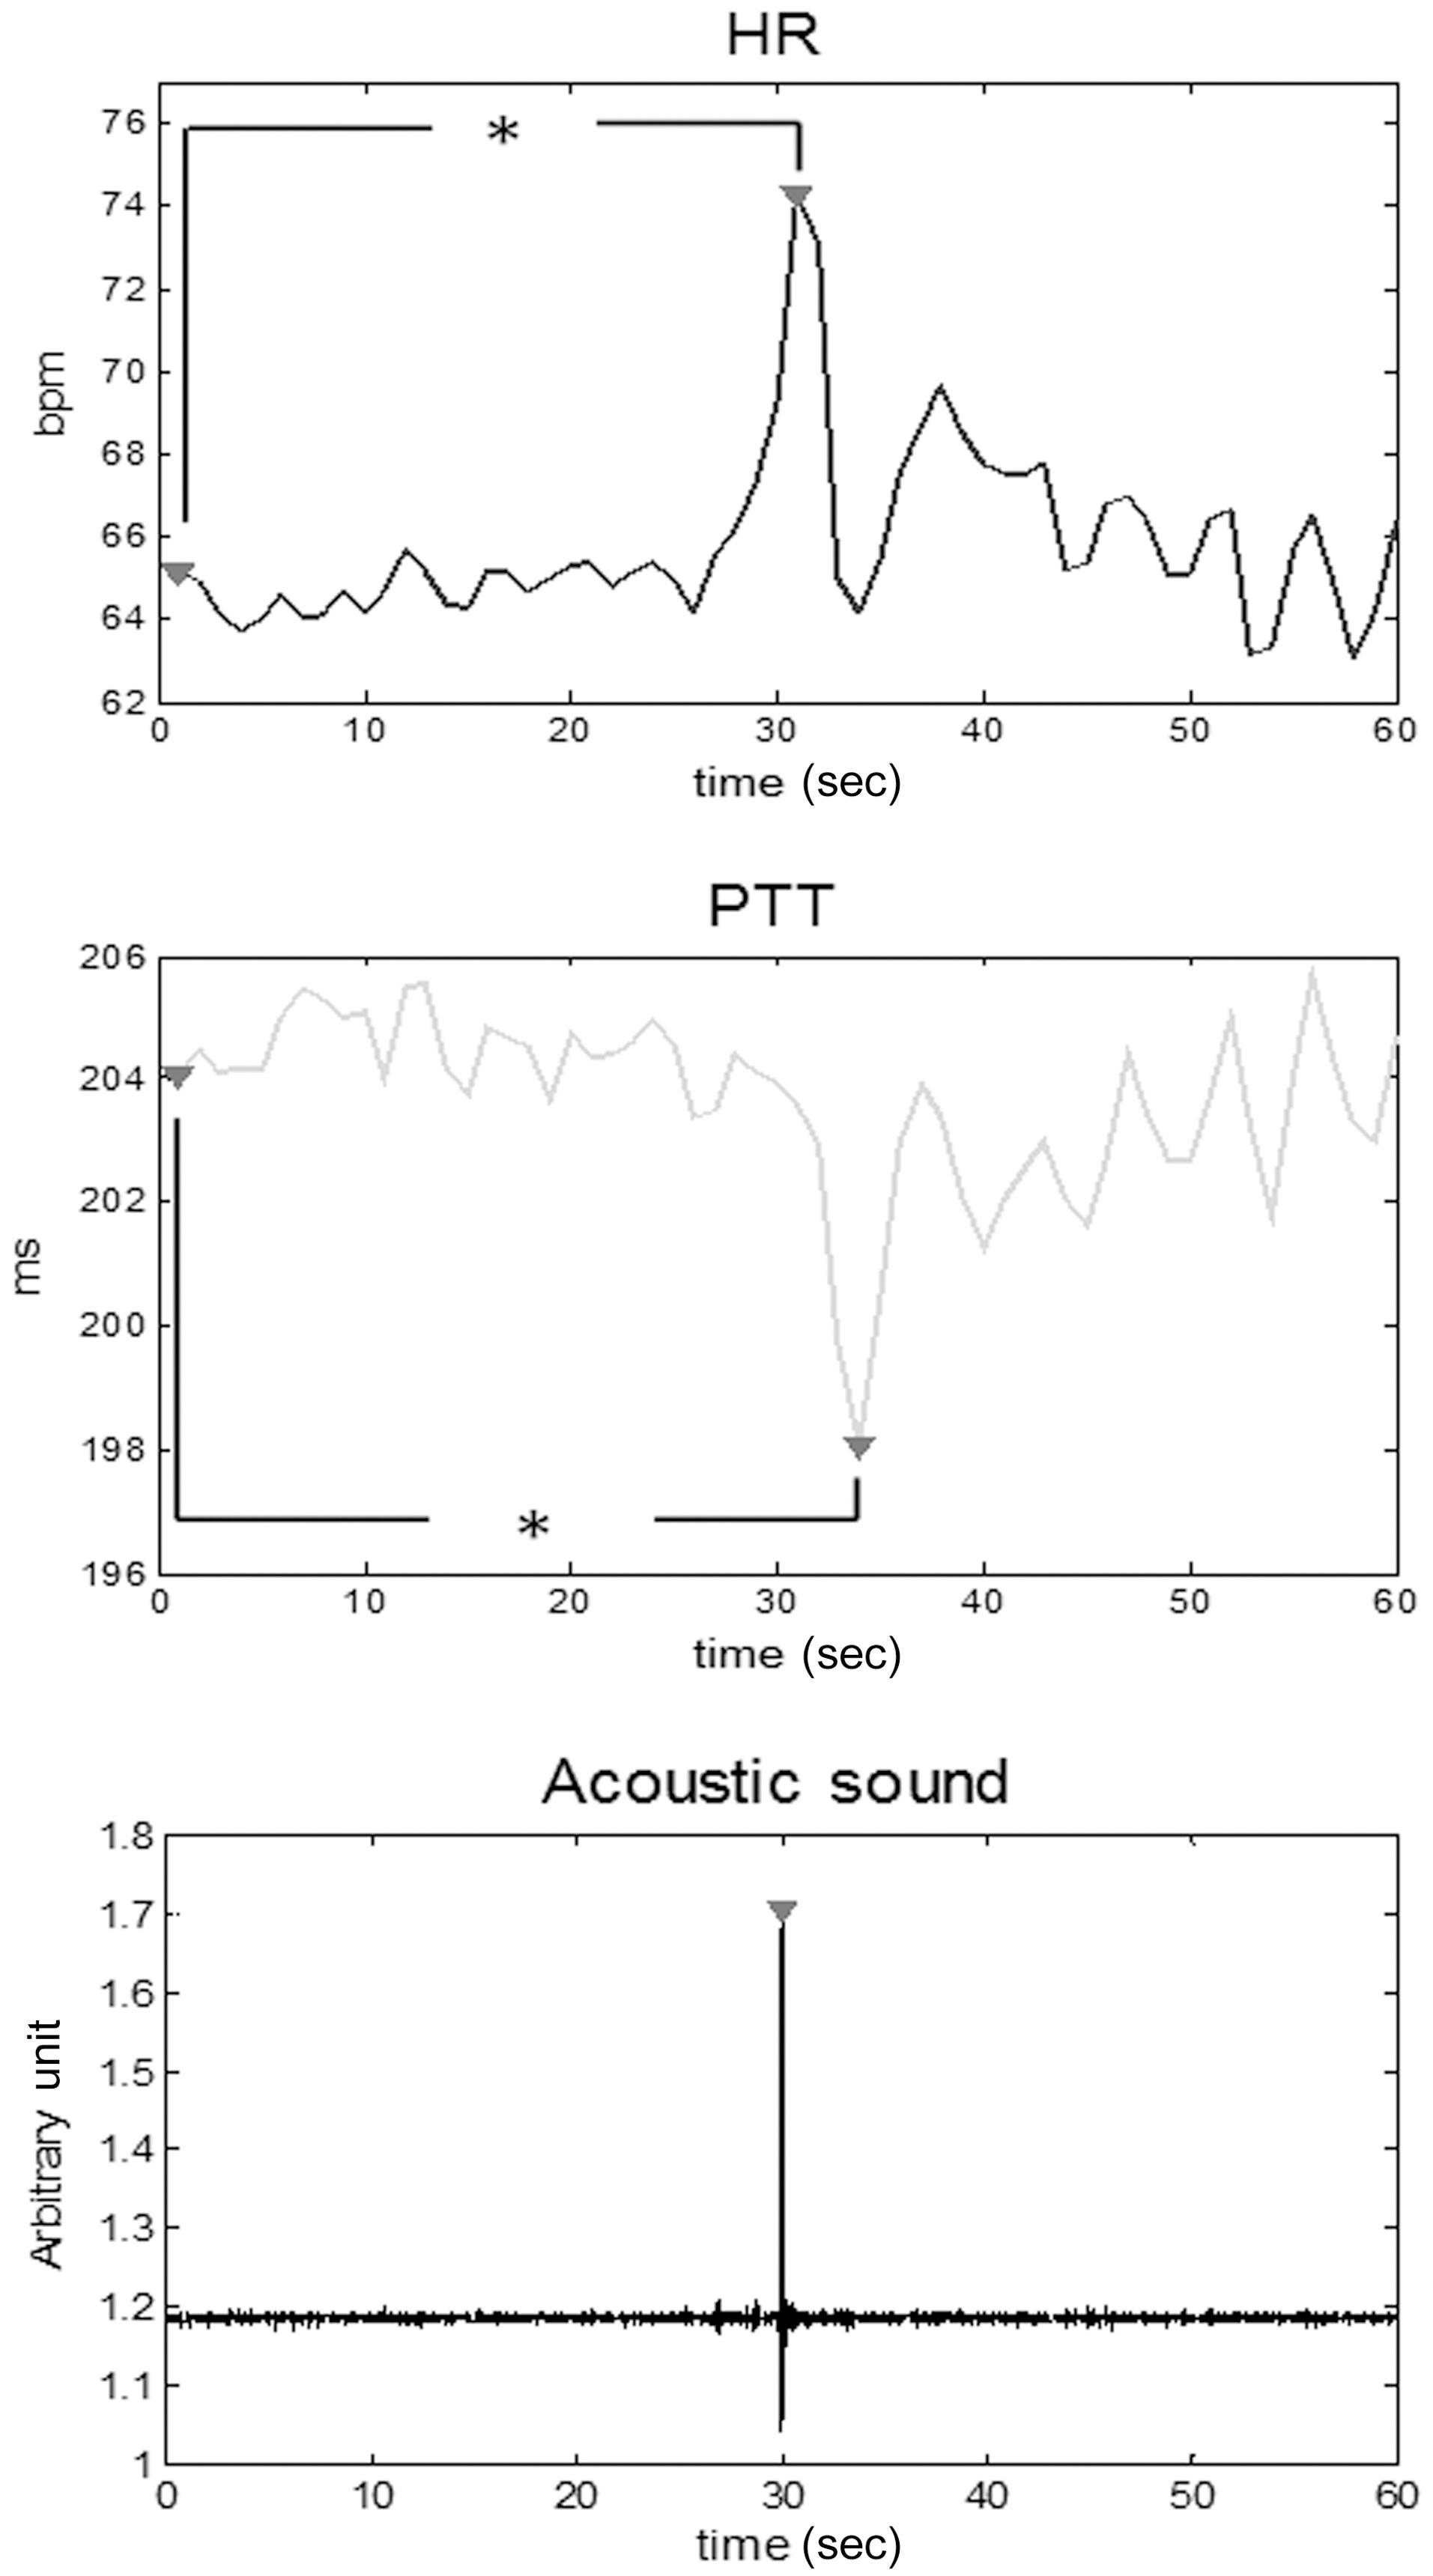 Averaged response of heart rate (HR) pulse transit time (PTT)and acoustic sound for a single swallow in 35 datasets (*P < 0.001).